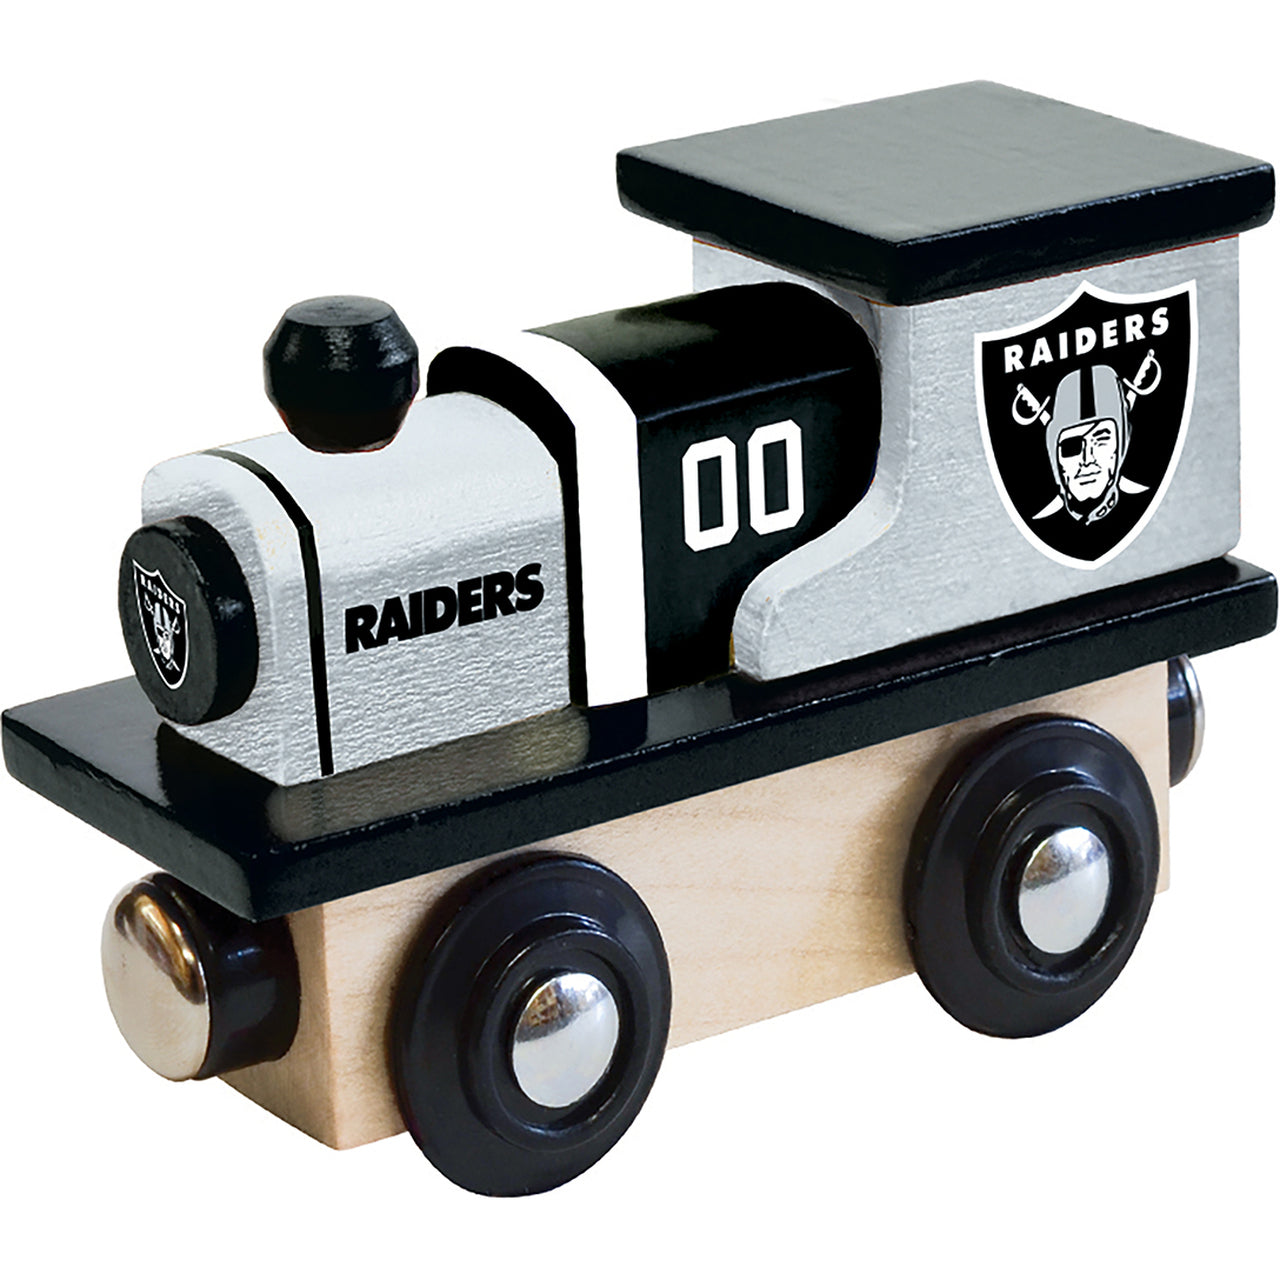 Las Vegas Raiders Wooden Toy Train Engine by Masterpieces